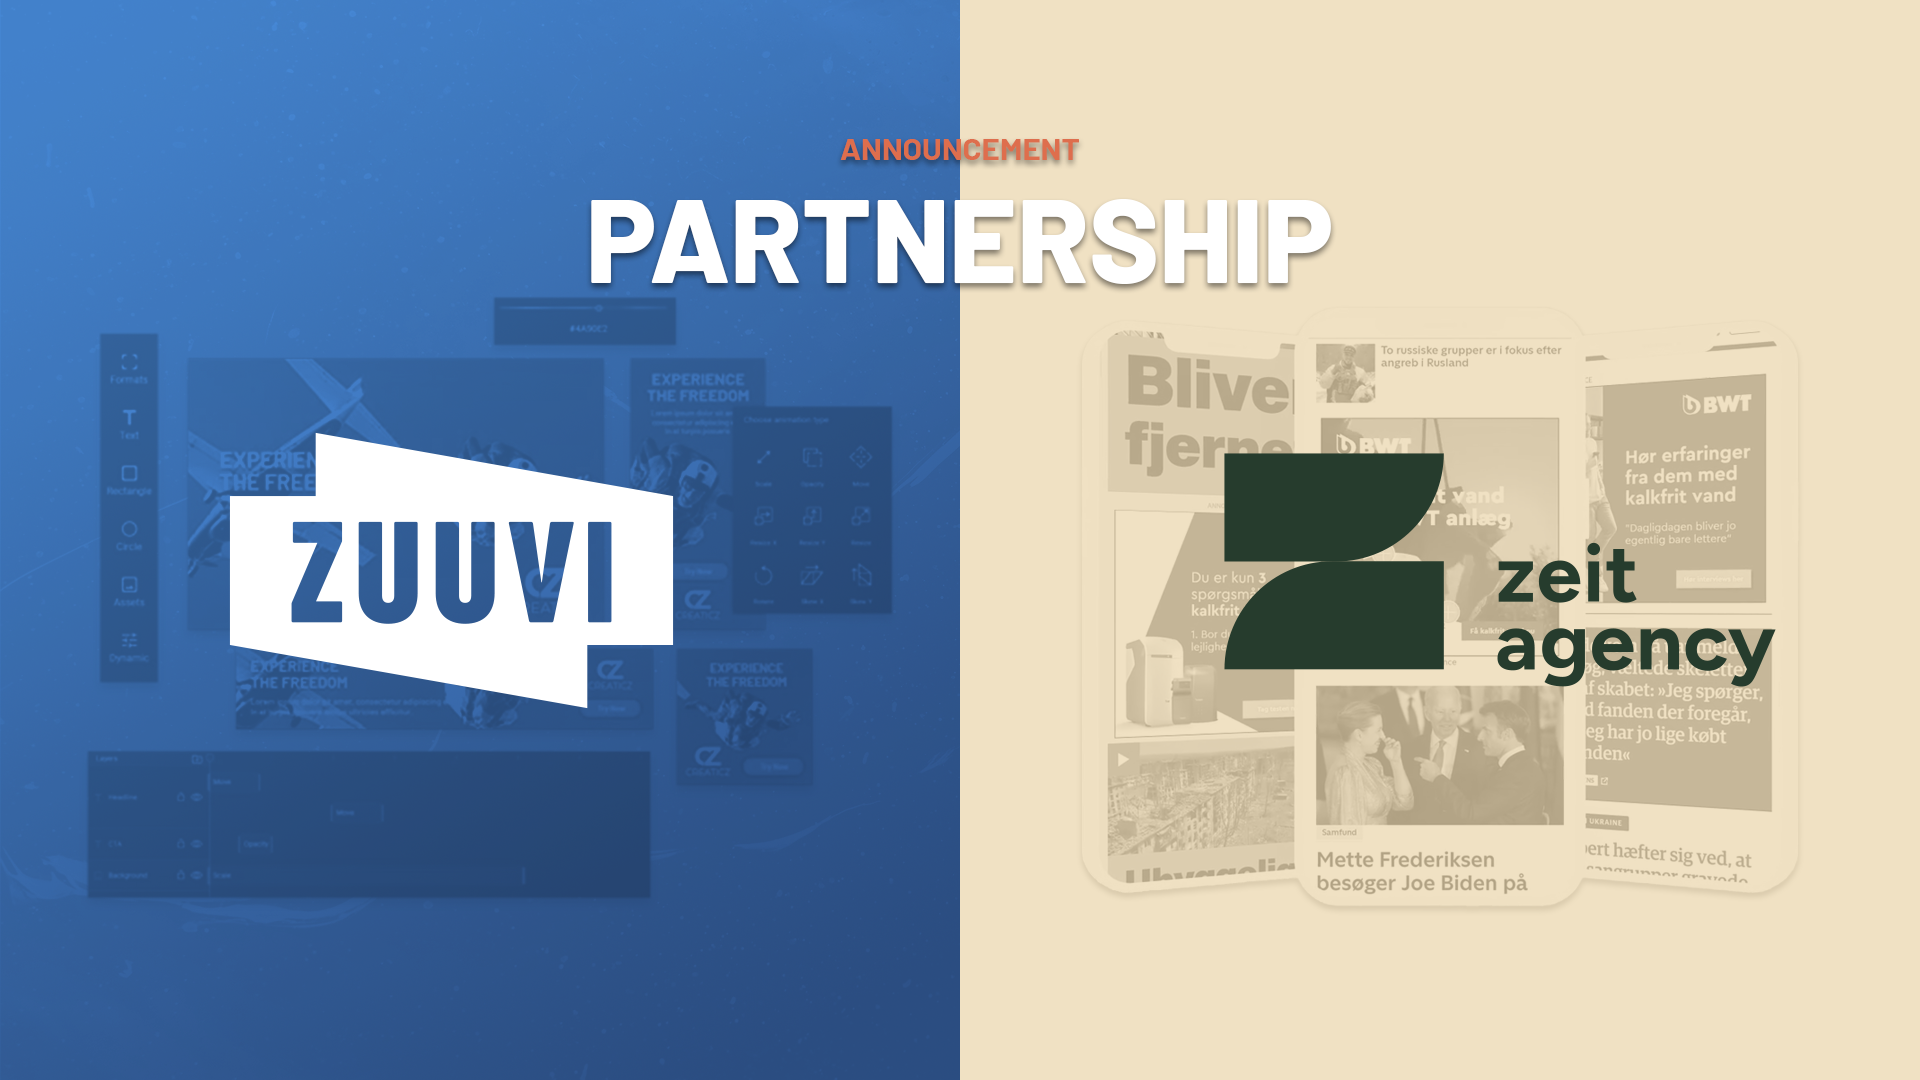 Insourcing AND Outsourcing: Zuuvi & Zeit Agency announce partnership